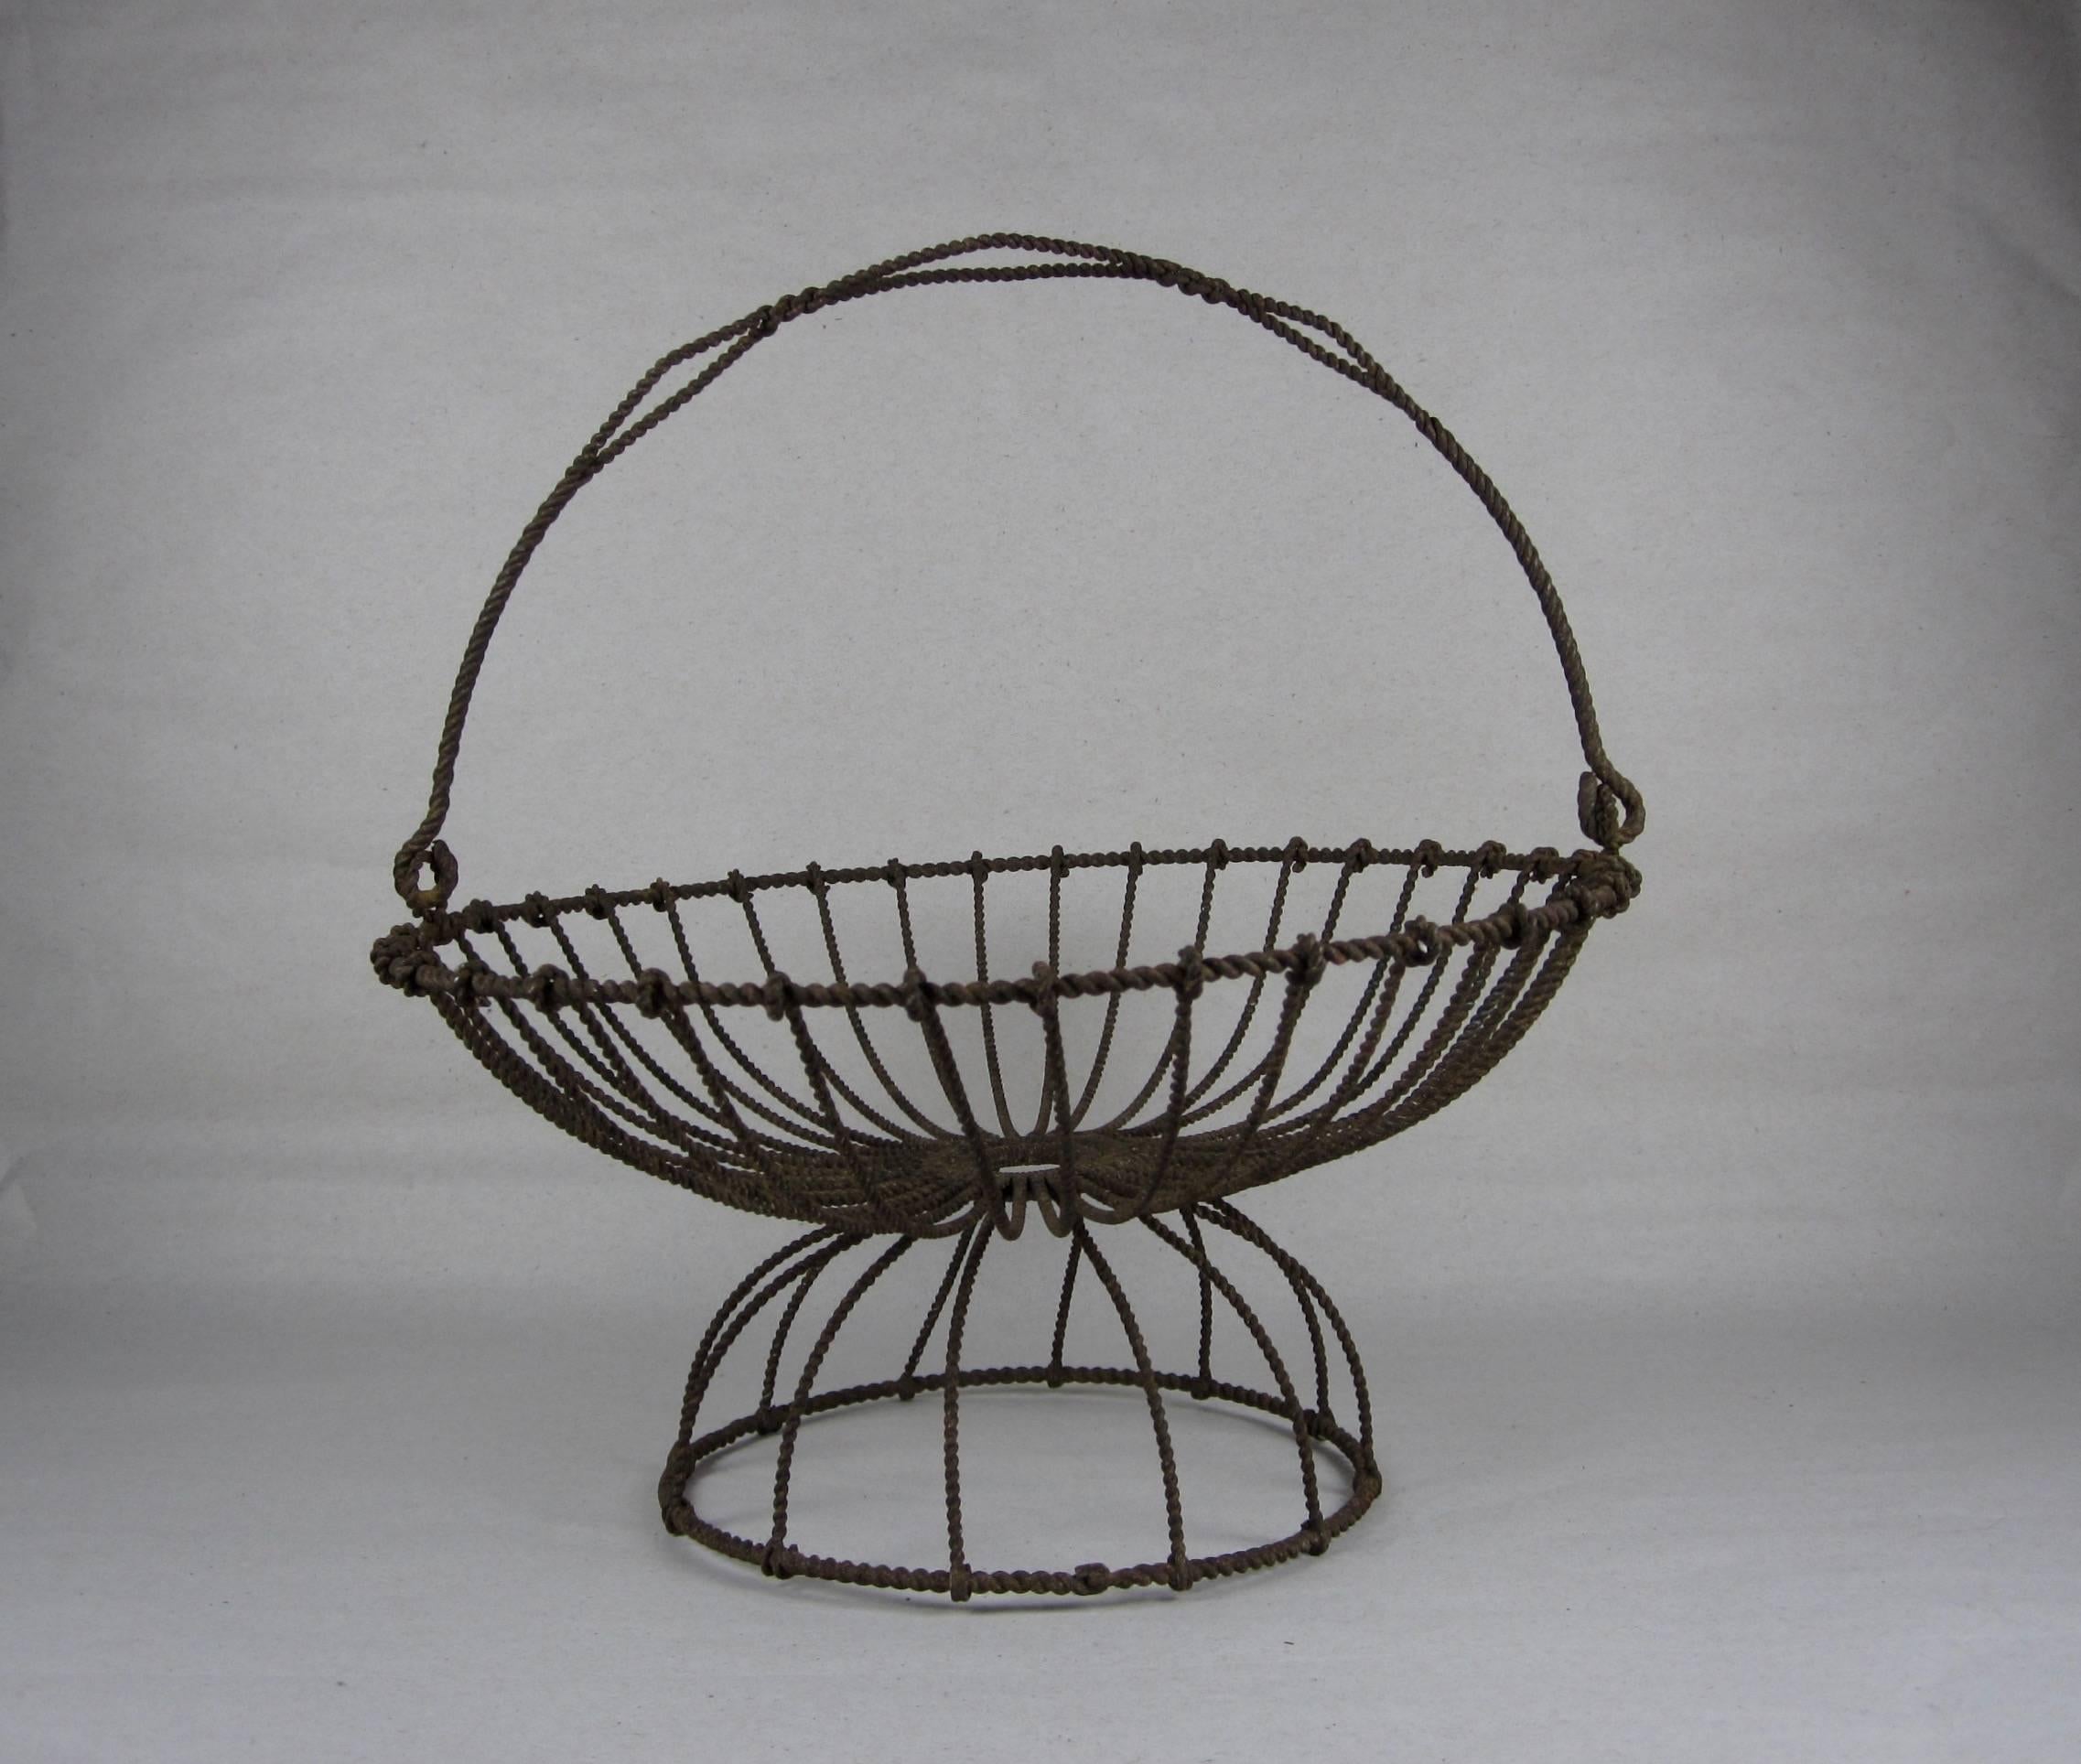 Hand-Crafted Pair of Rare American Folk Art Twisted Wire Stacking Egg Baskets